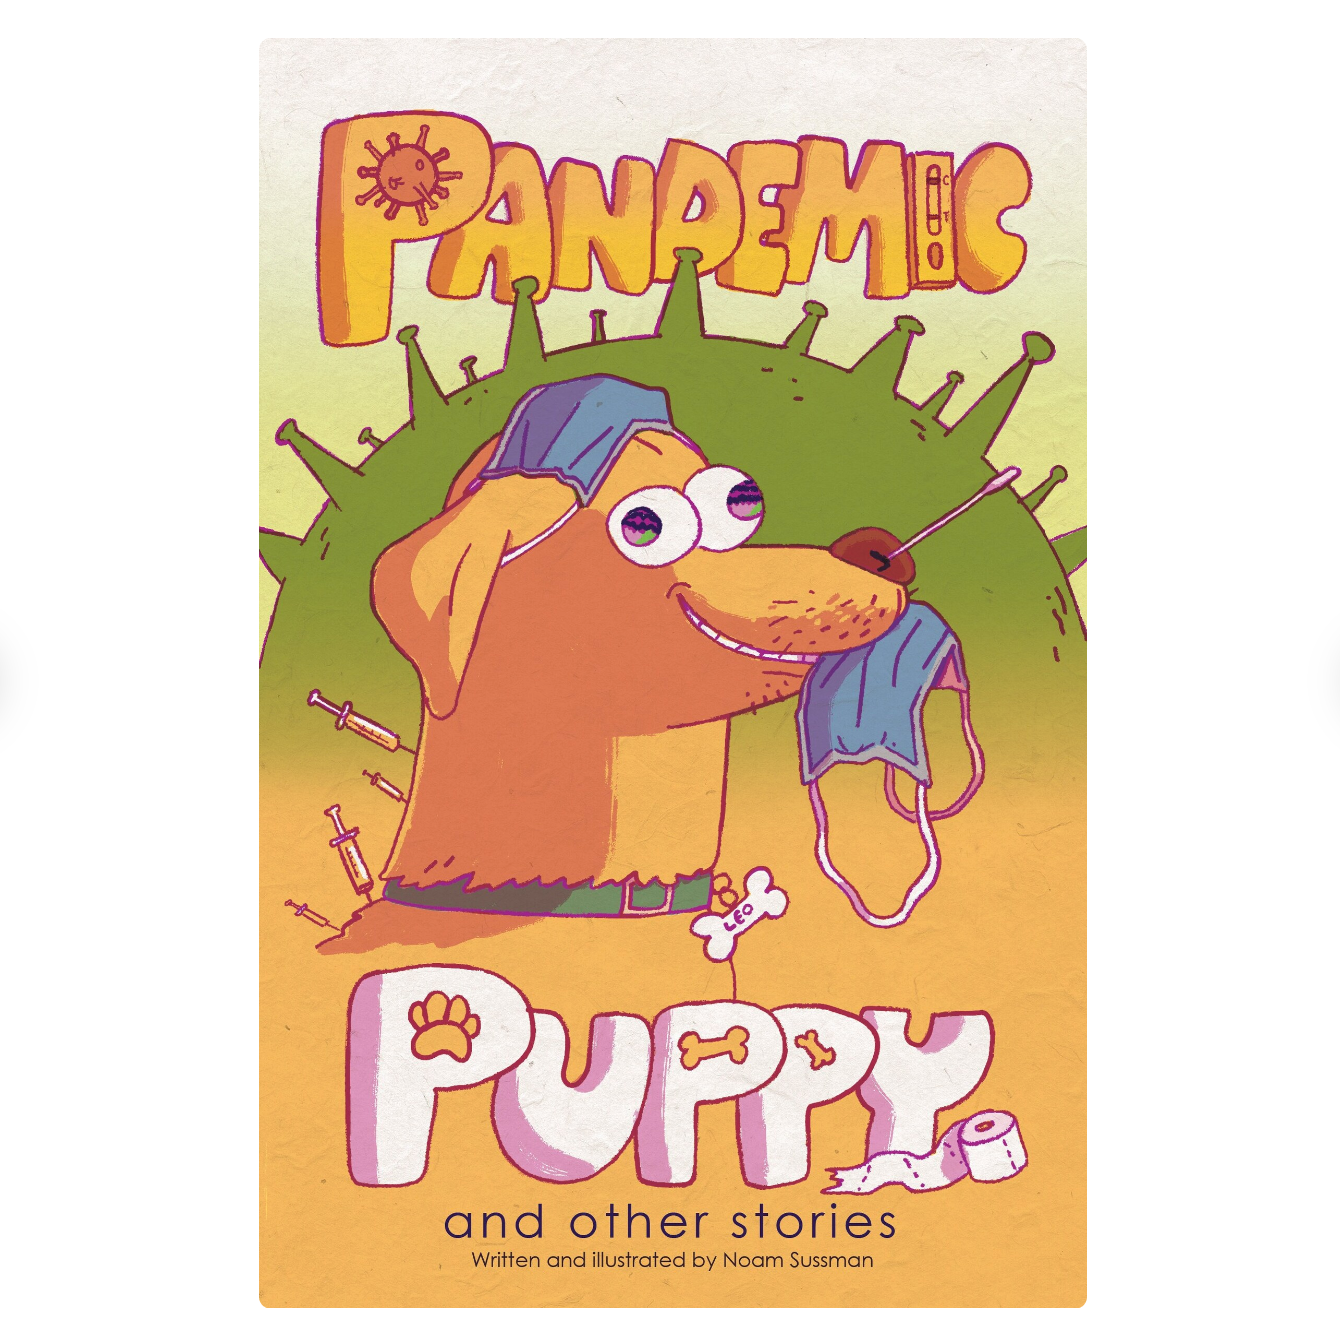 Pandemic Puppy and other stories